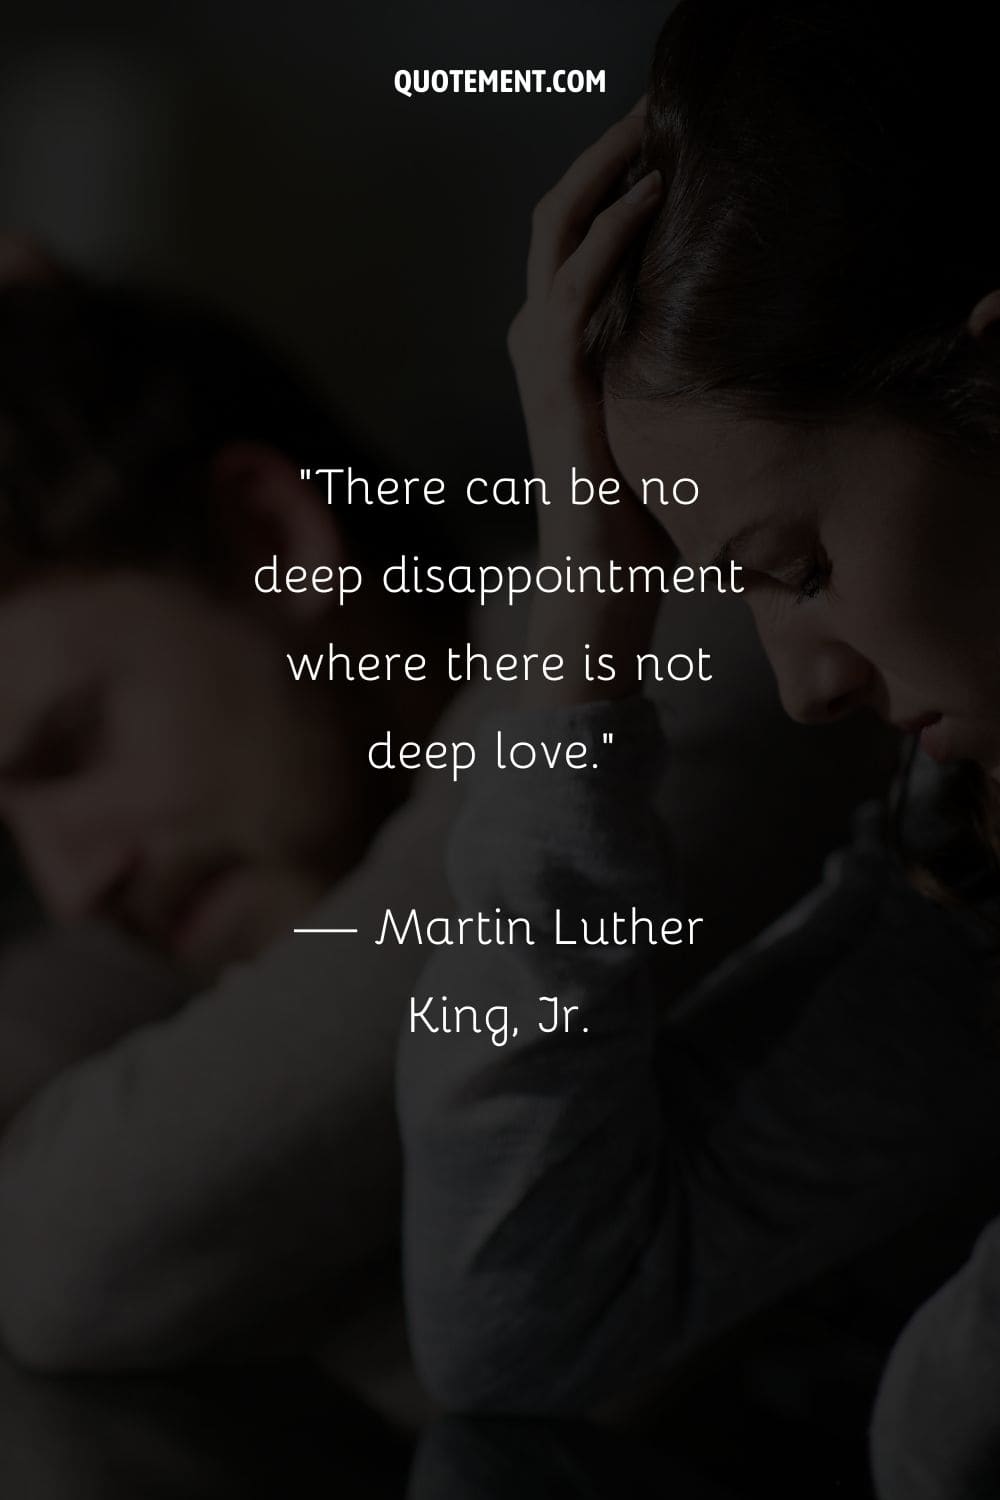 There can be no deep disappointment where there is not deep love